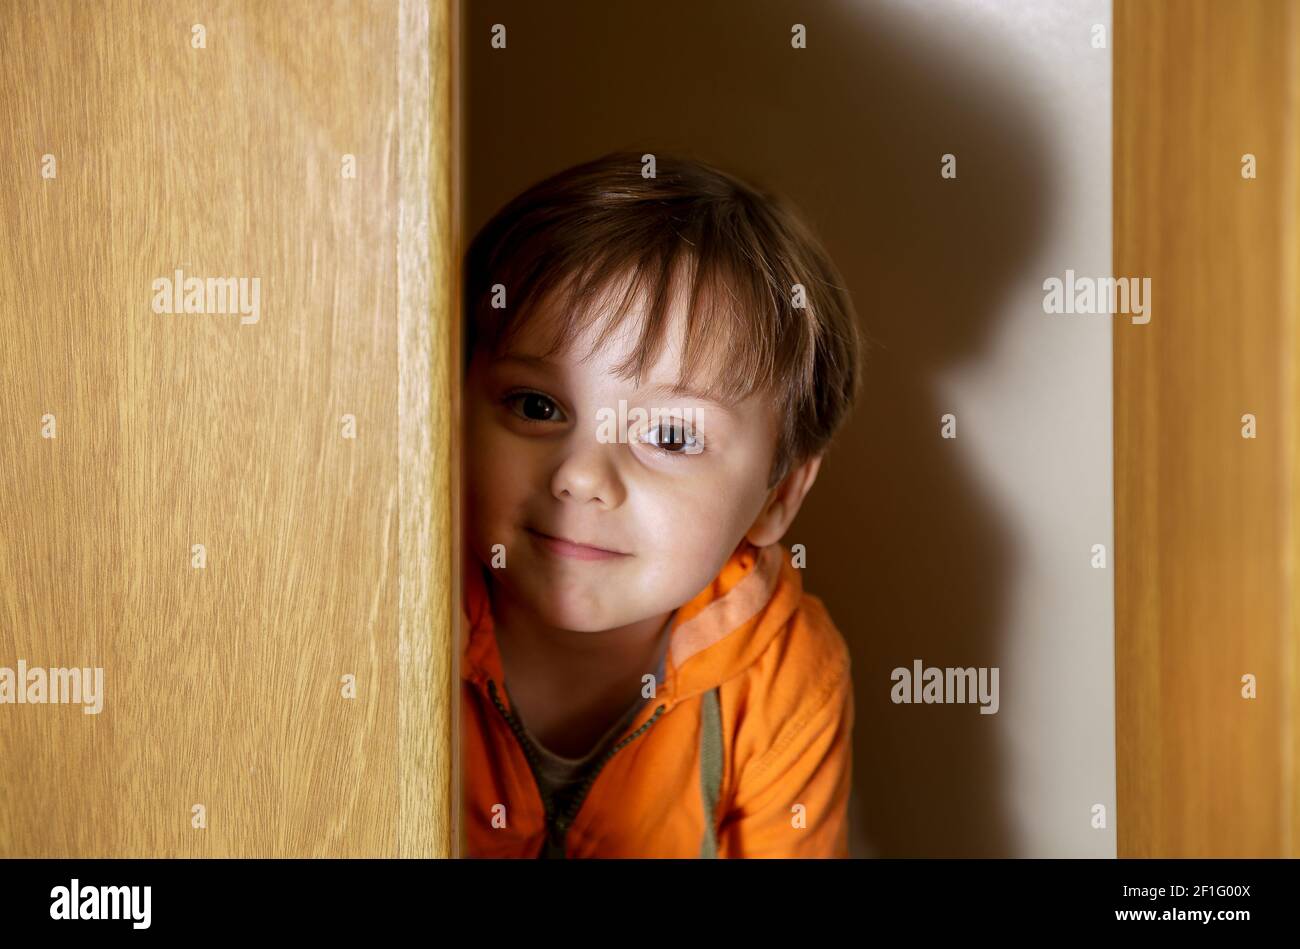 Little boy playing hide and seek in a closet. Stock Photo